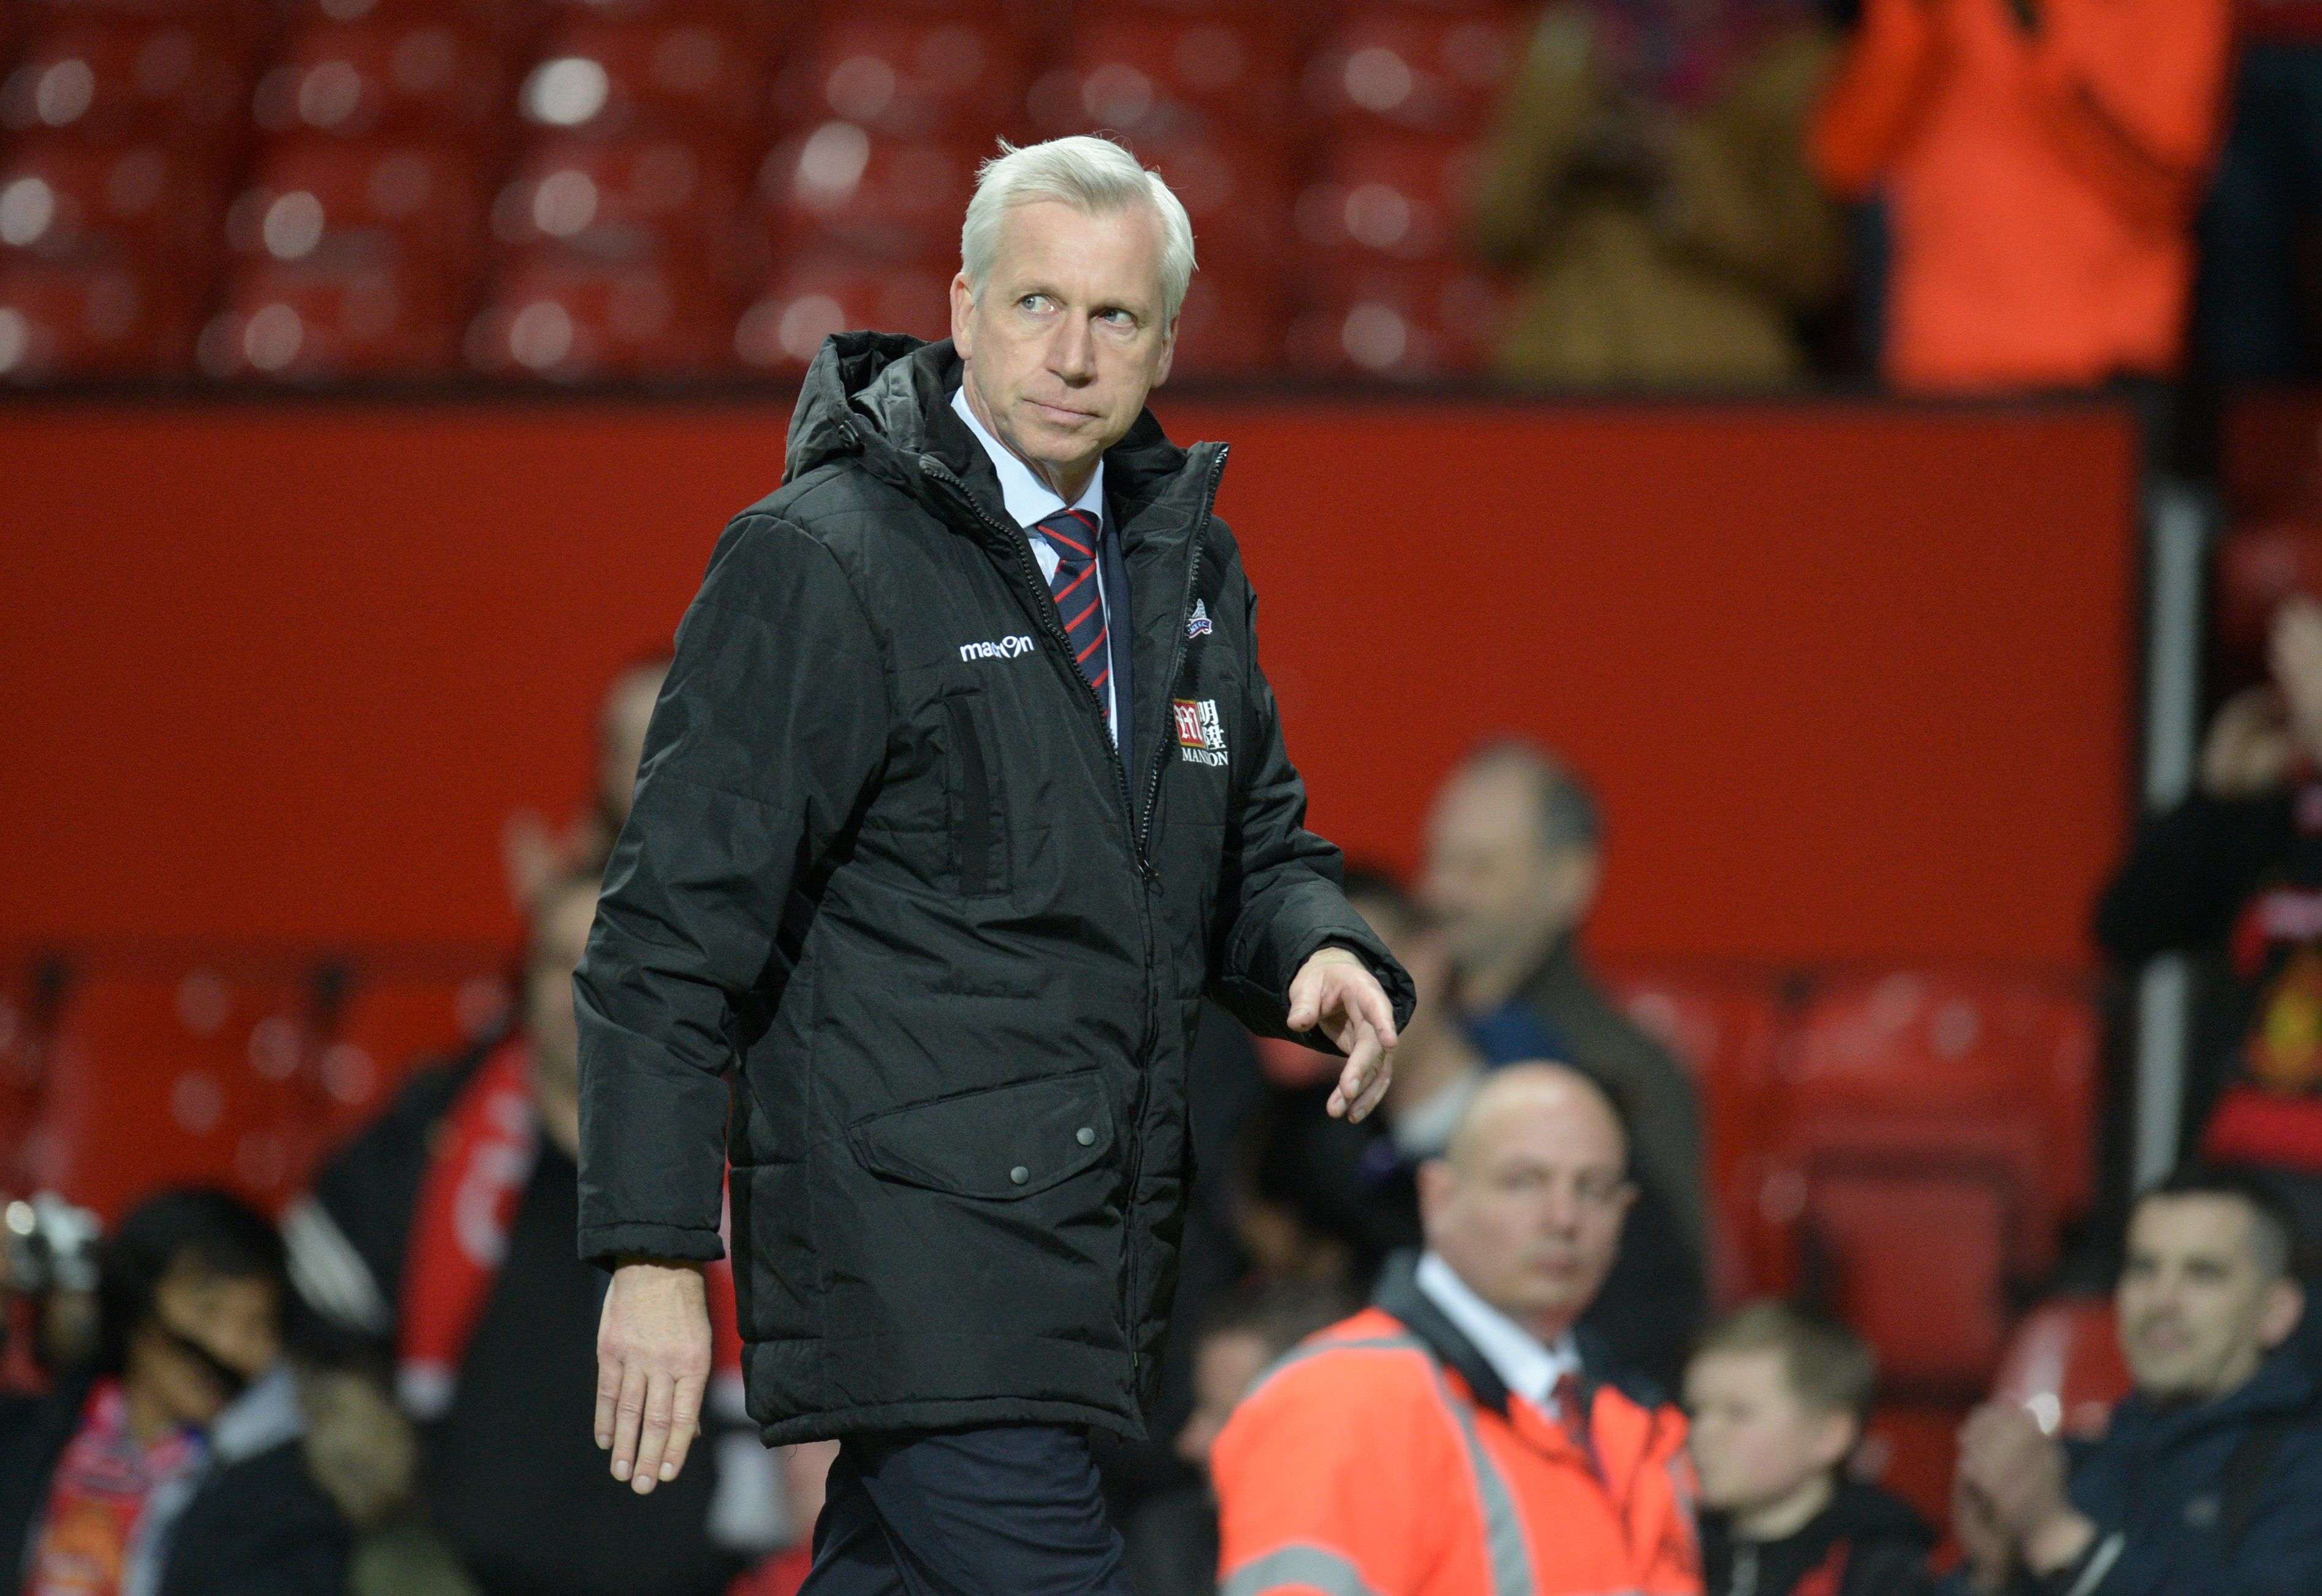 Alan Pardew is sacked by Crystal Palace but left with praise for the club and its owners. Photo: AFP